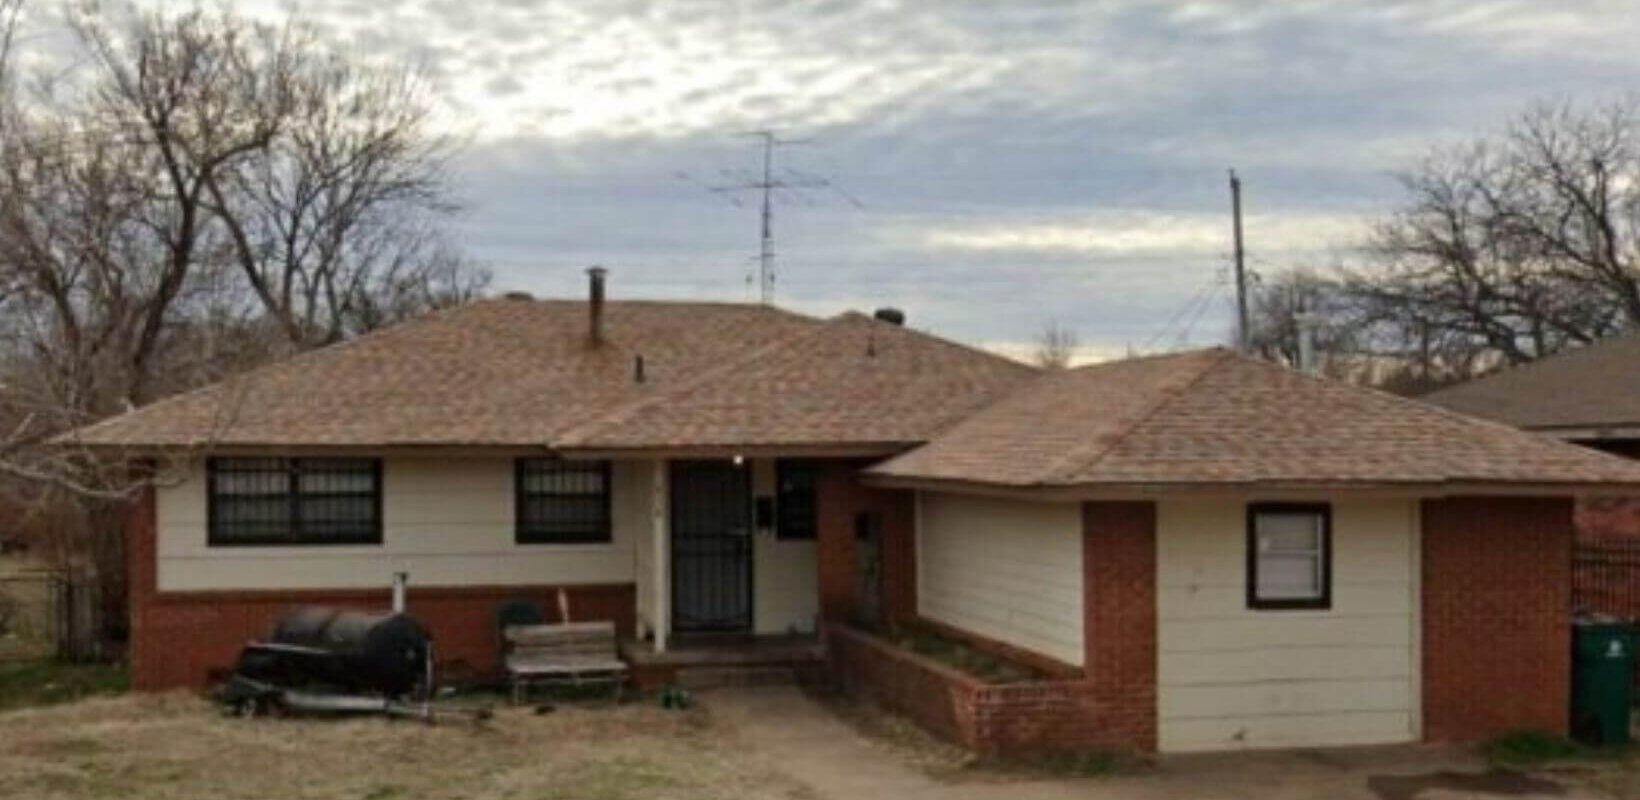 sell my house for cash Piedmont OK